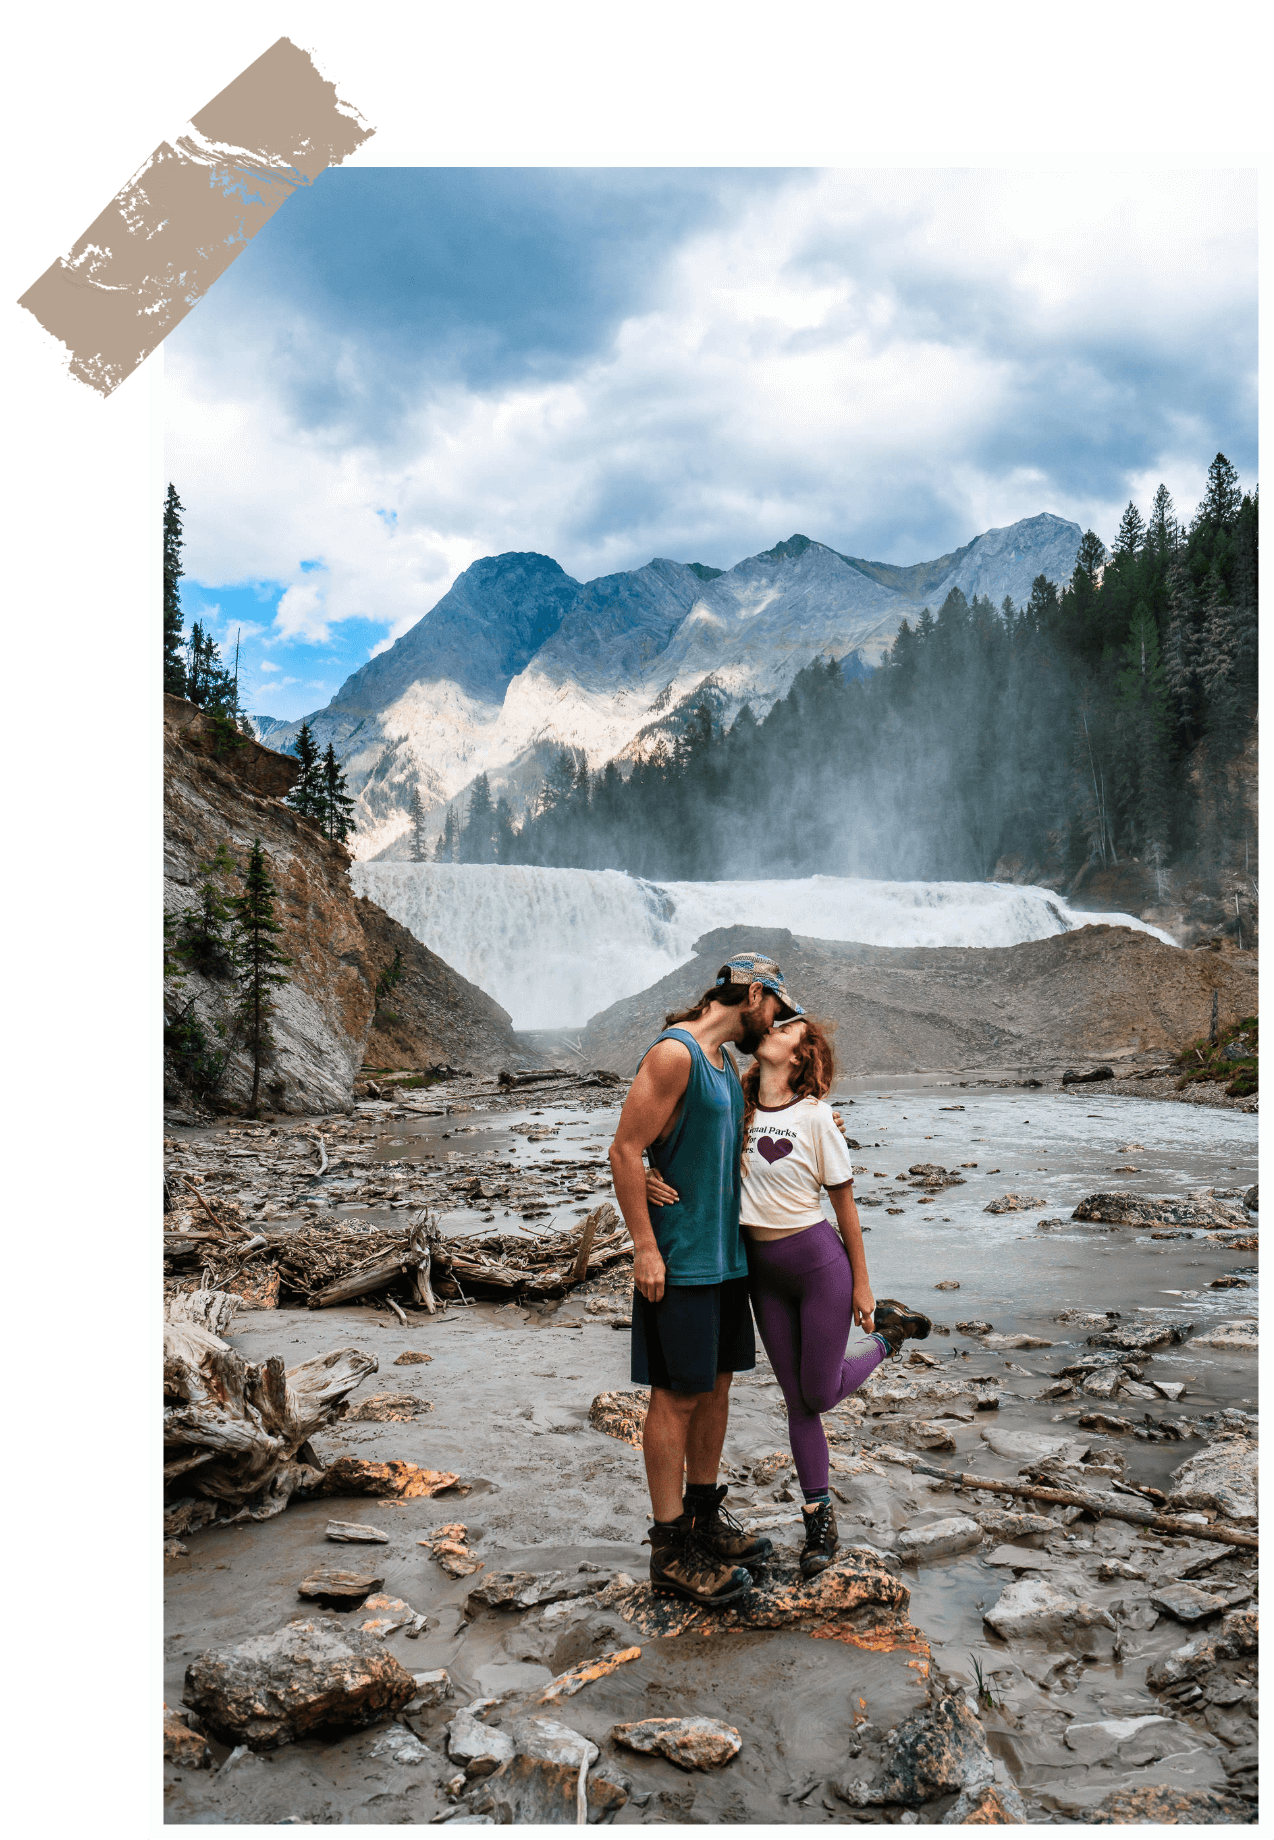 Meg and Kevin sharing a kiss on a rocky riverbed with a waterfall and mountains in the background.